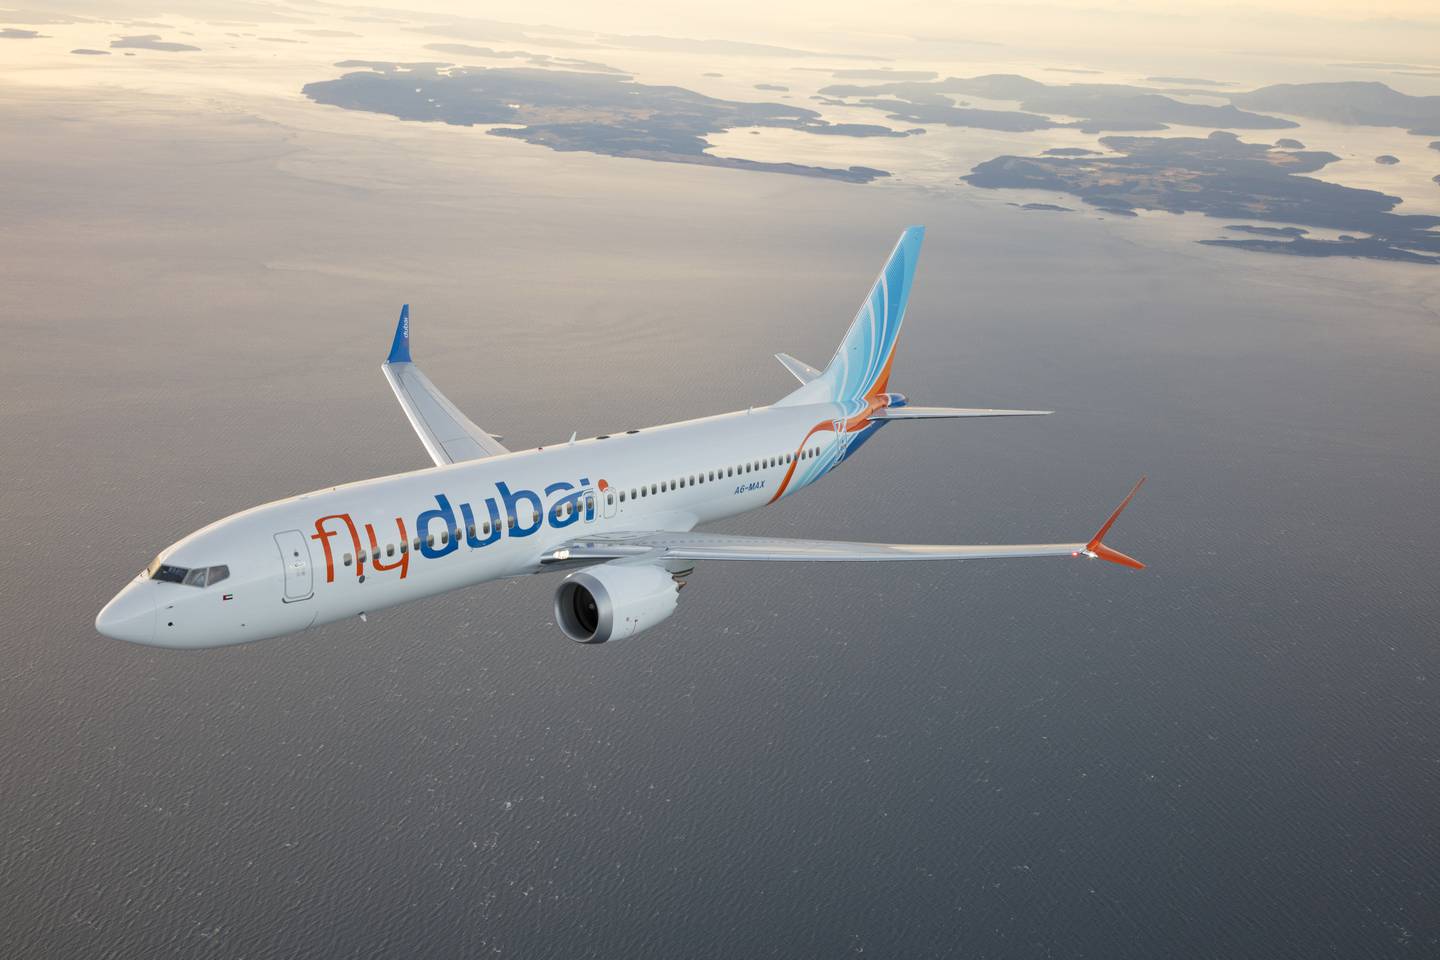 Flydubai carried 5.6 million passengers last year, an increase of 76 per cent compared with 2020. Photo: flydubai